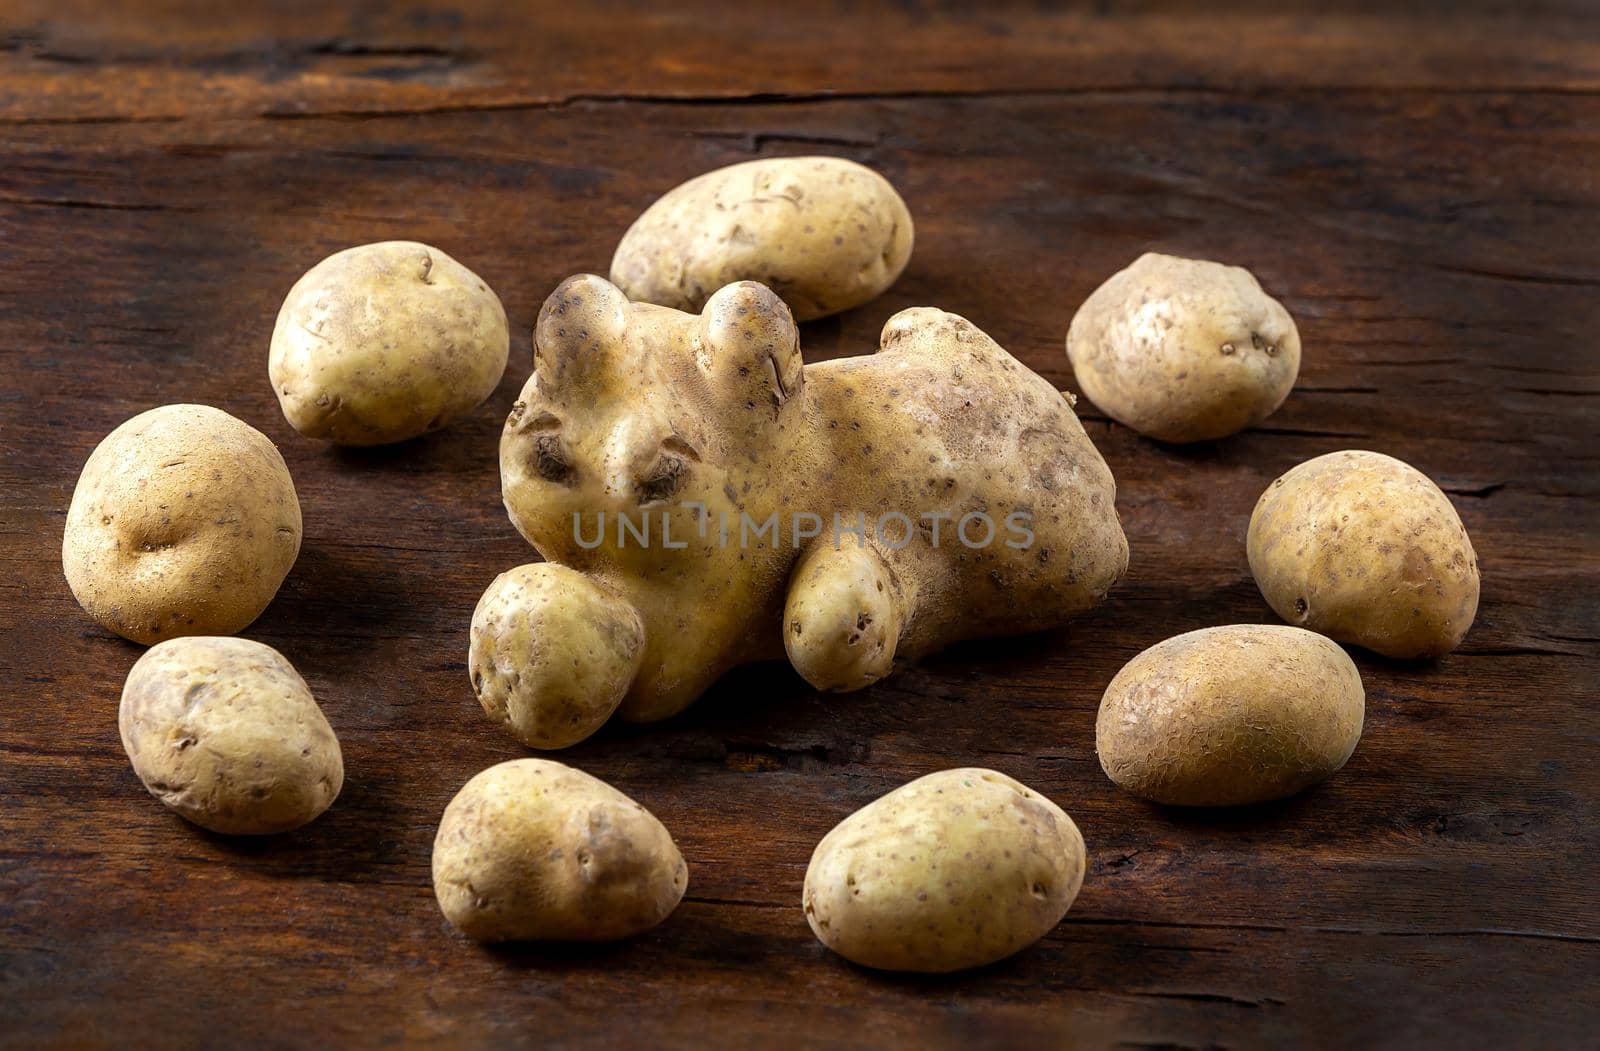 Ungraded organic potatoes ON A WOODEN BACKGROUND by JPC-PROD